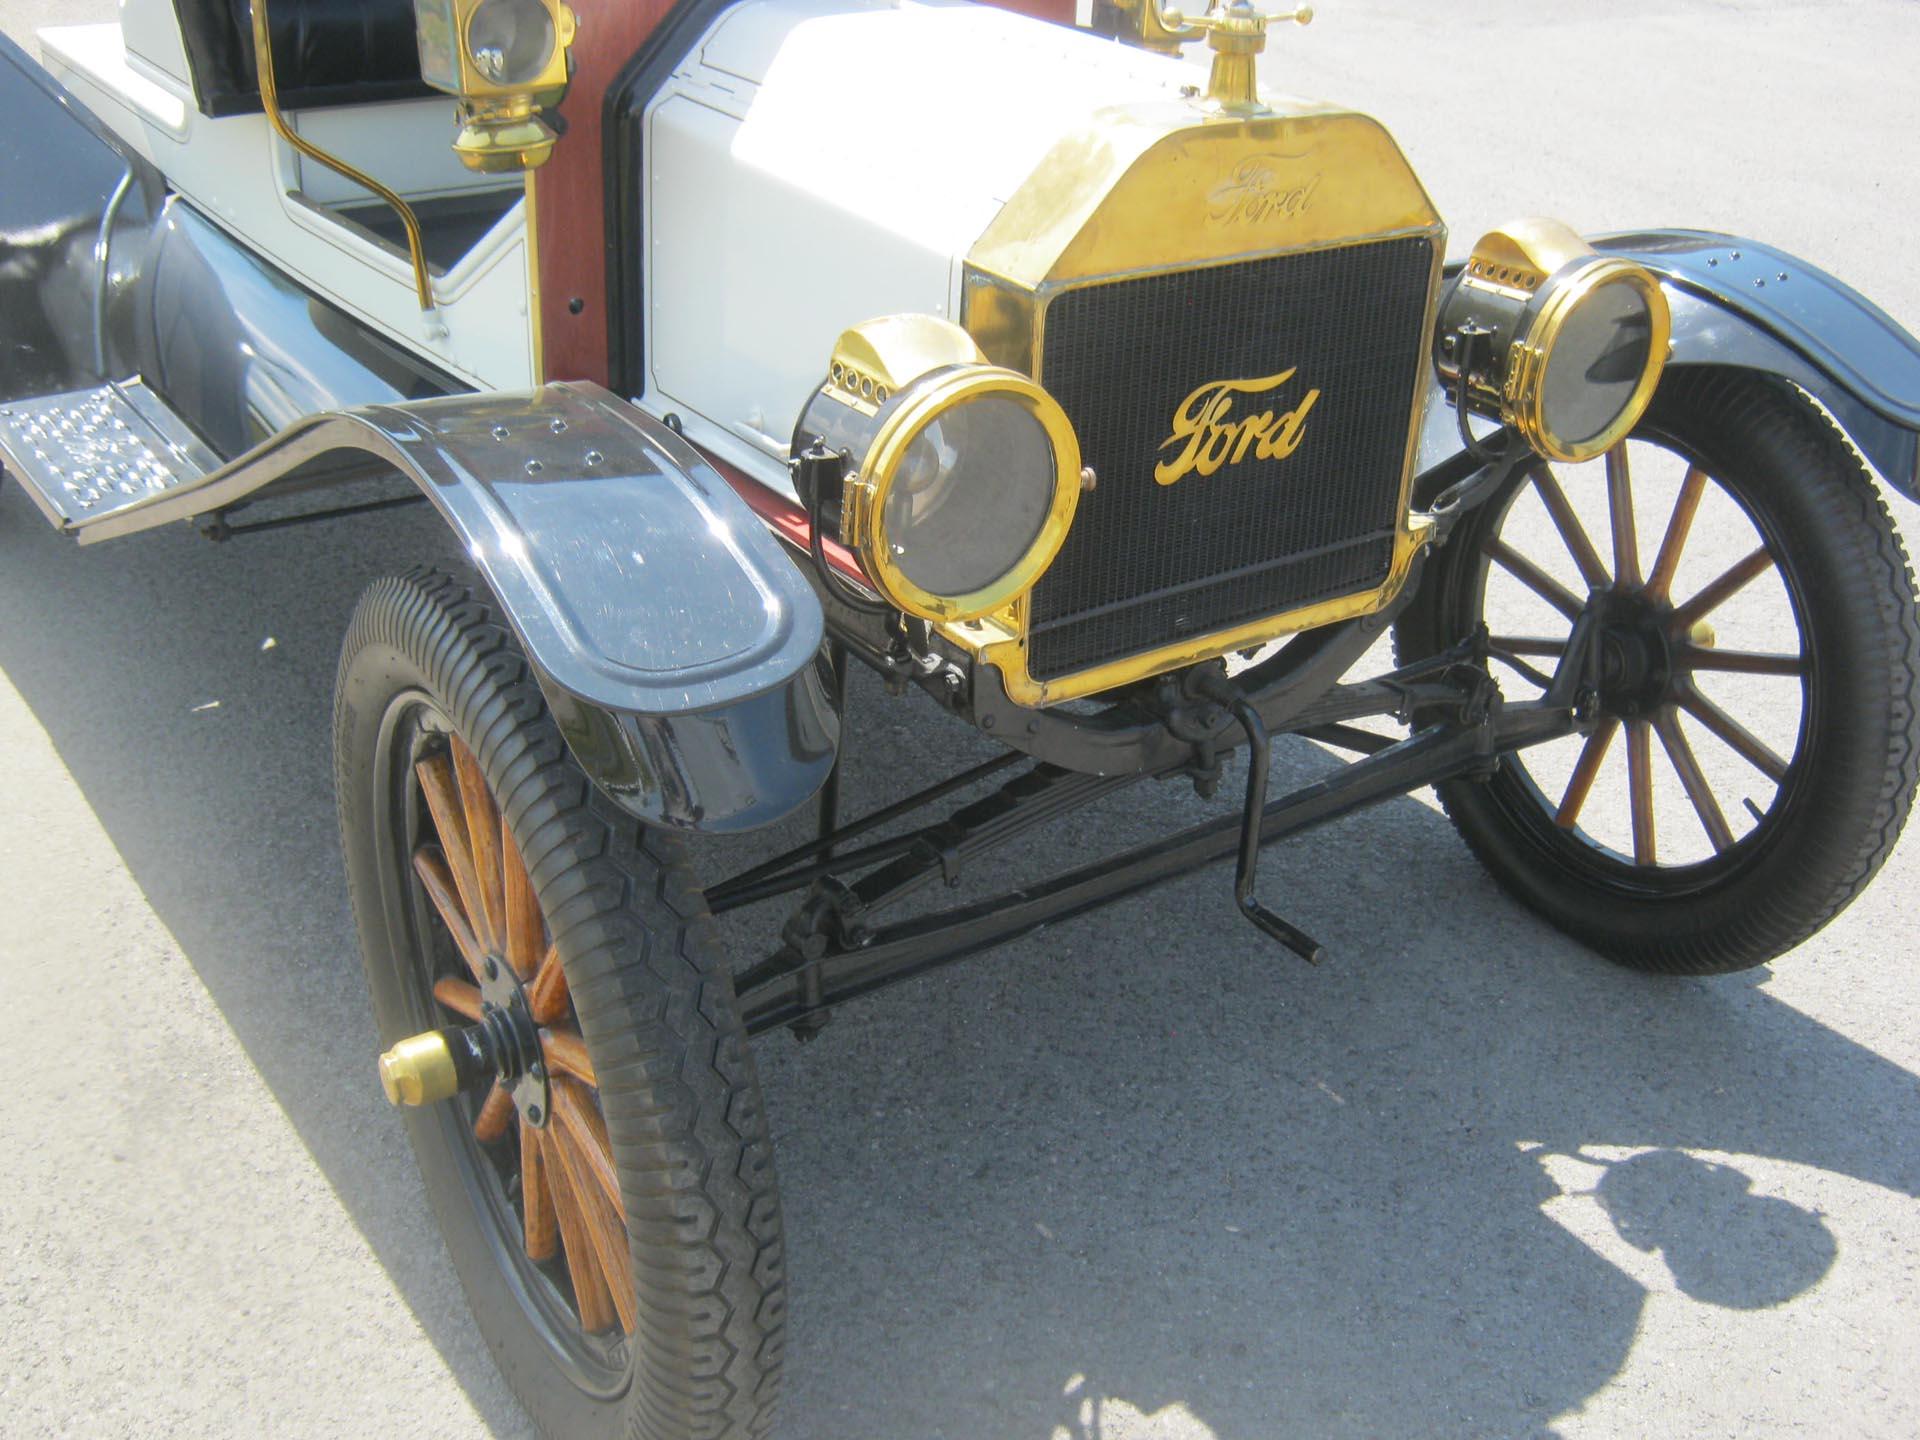 1911 Ford Model T Runabout